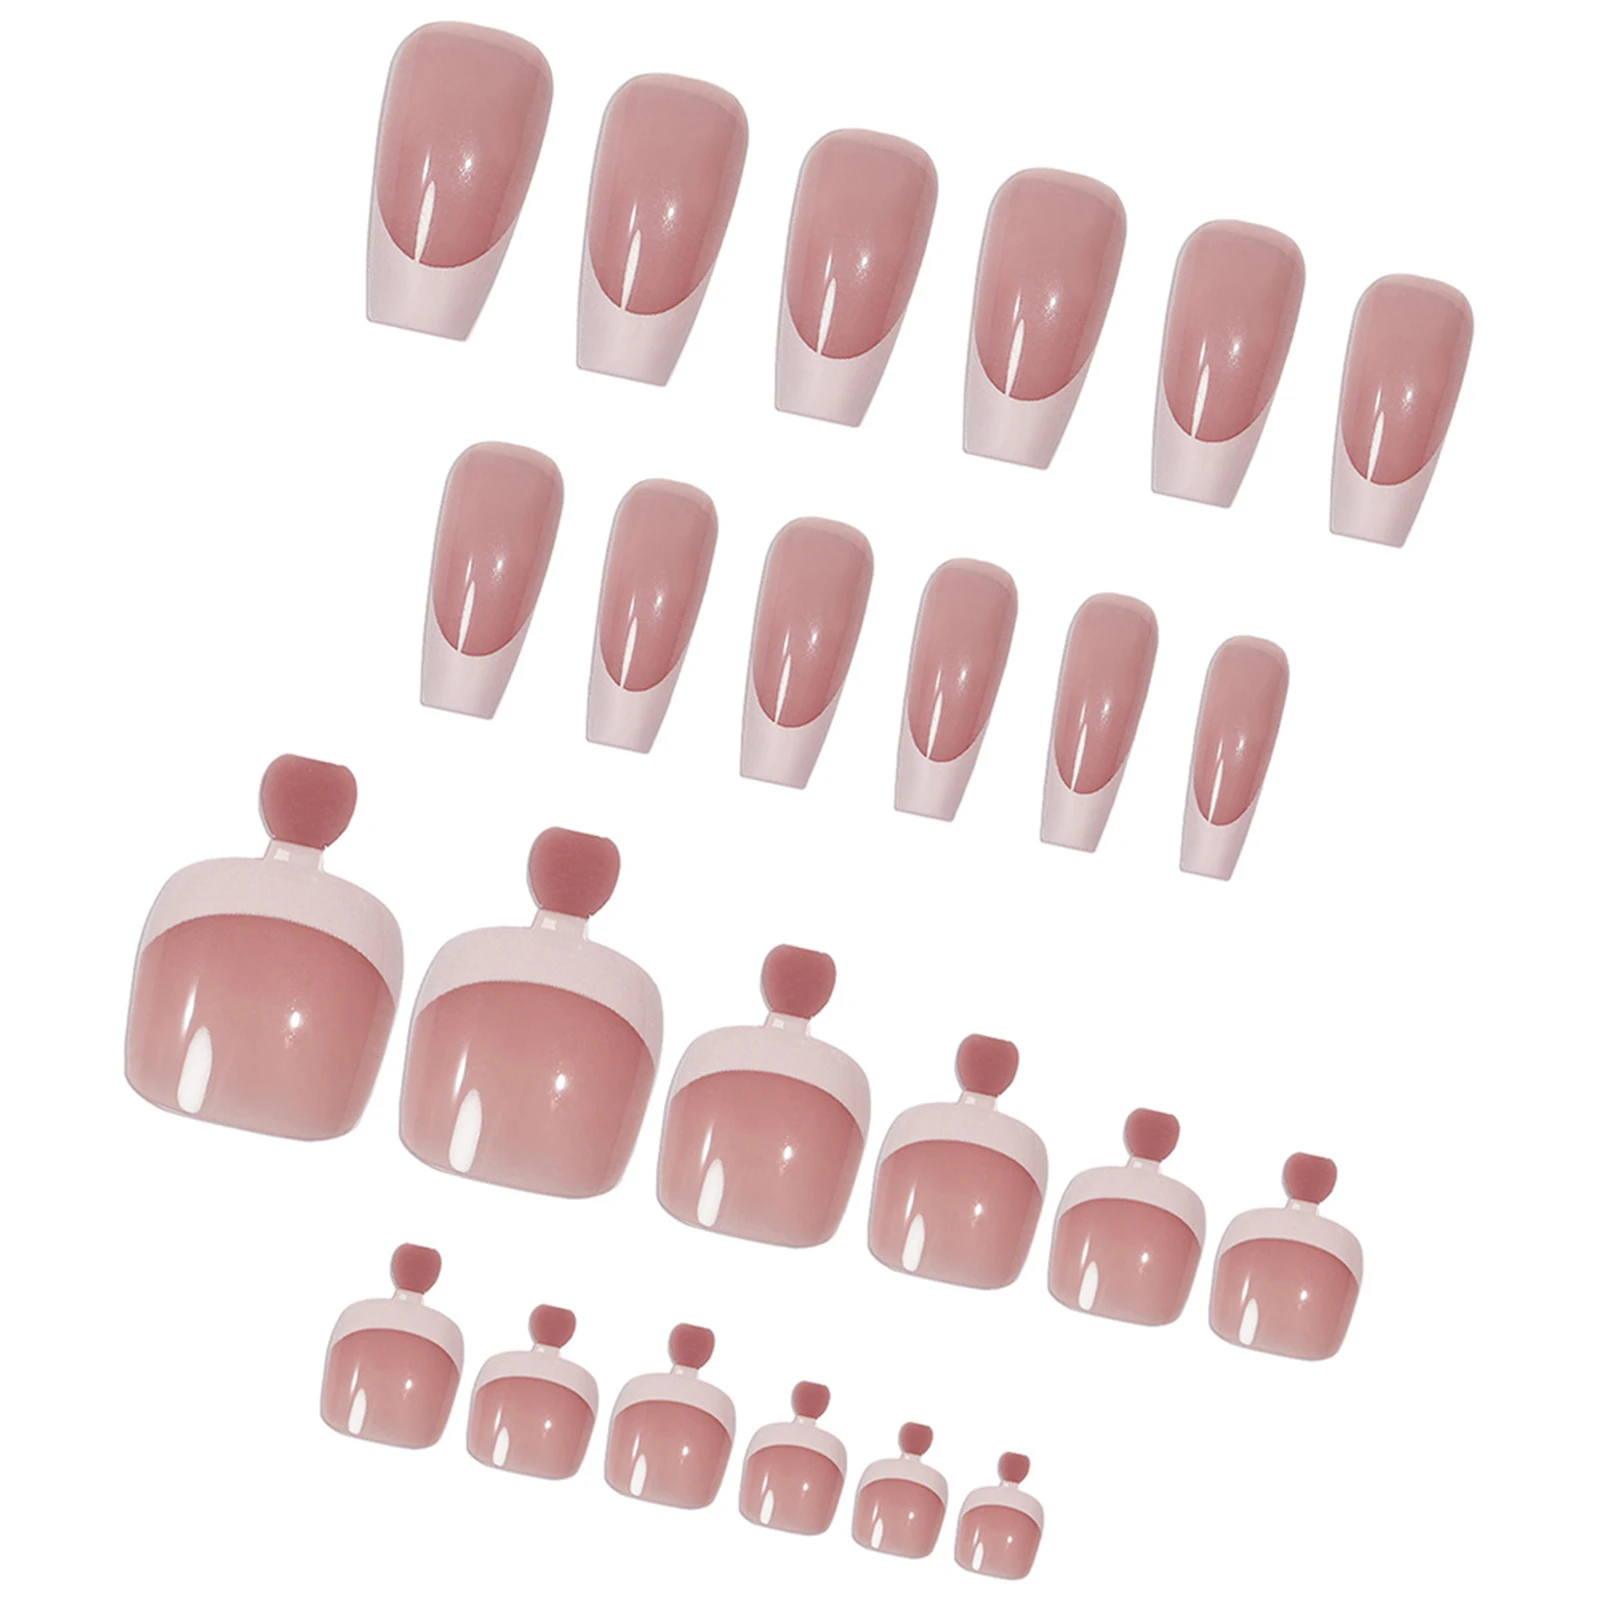 

Pink with White Tip Fake Nail Toenails Easy to Apply Simple to Peel off Nails for Shopping Traveling Dating